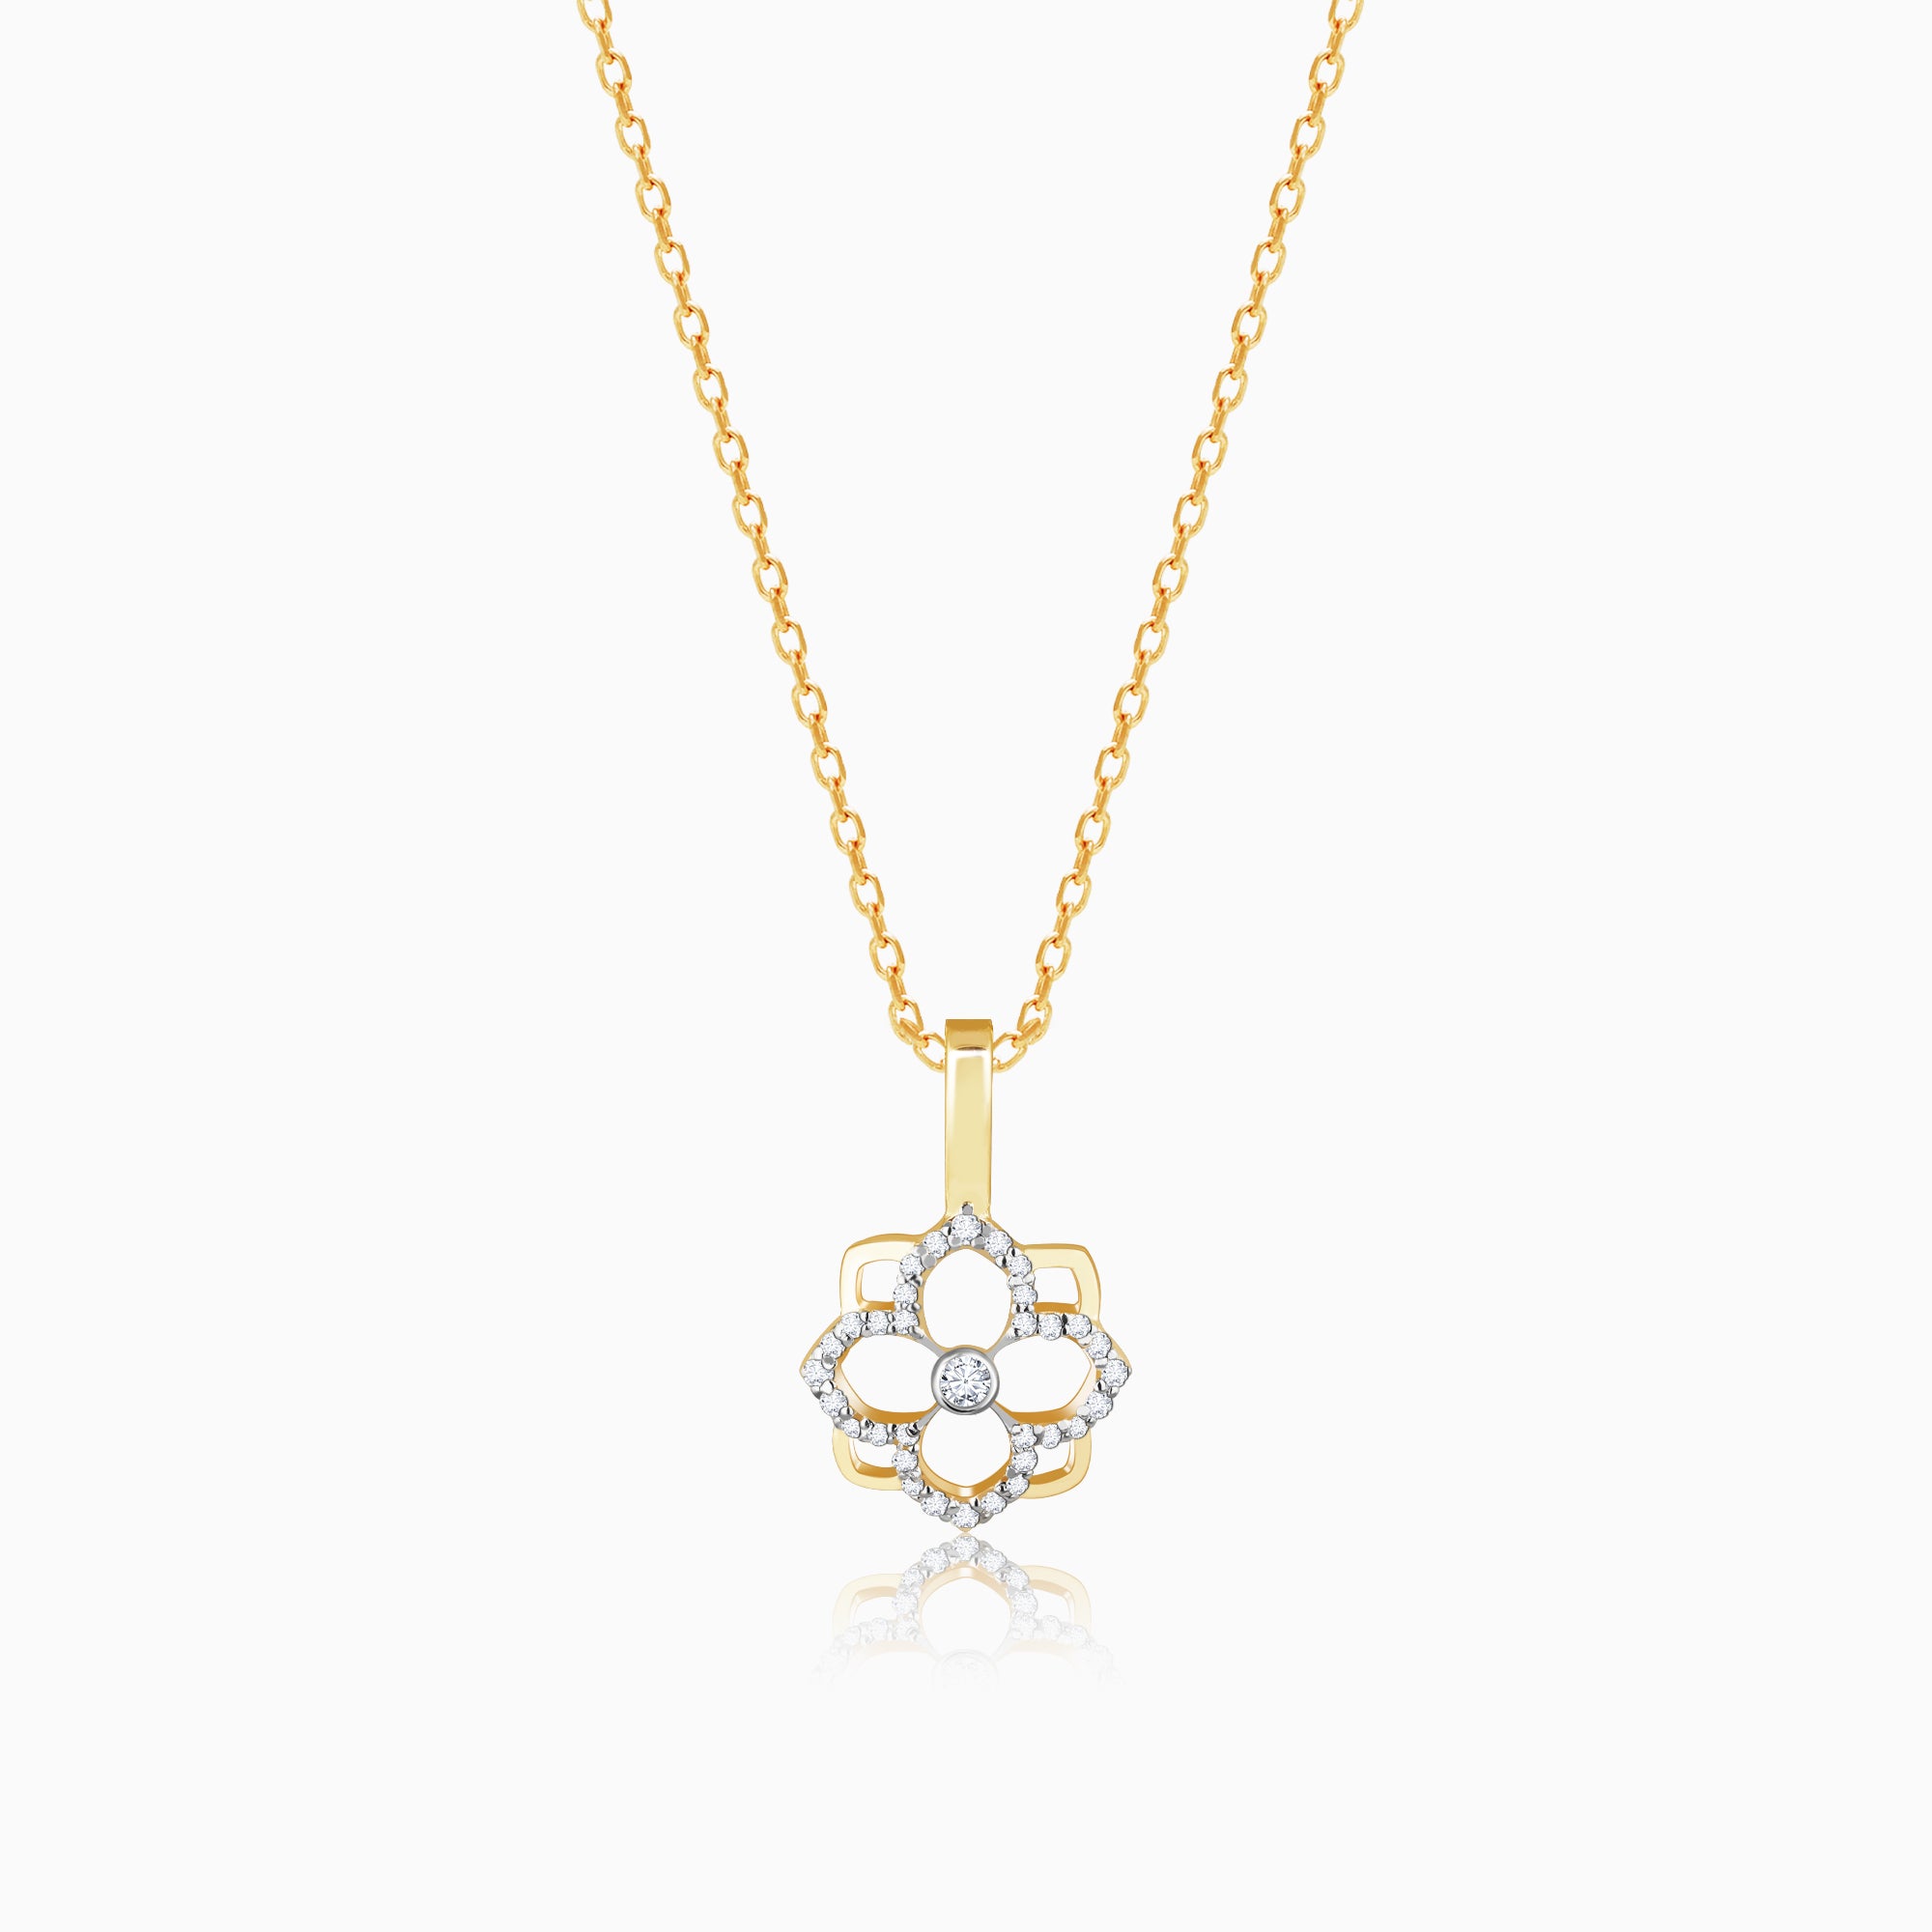 Golden Blooming Flower Necklace – GIVA Jewellery